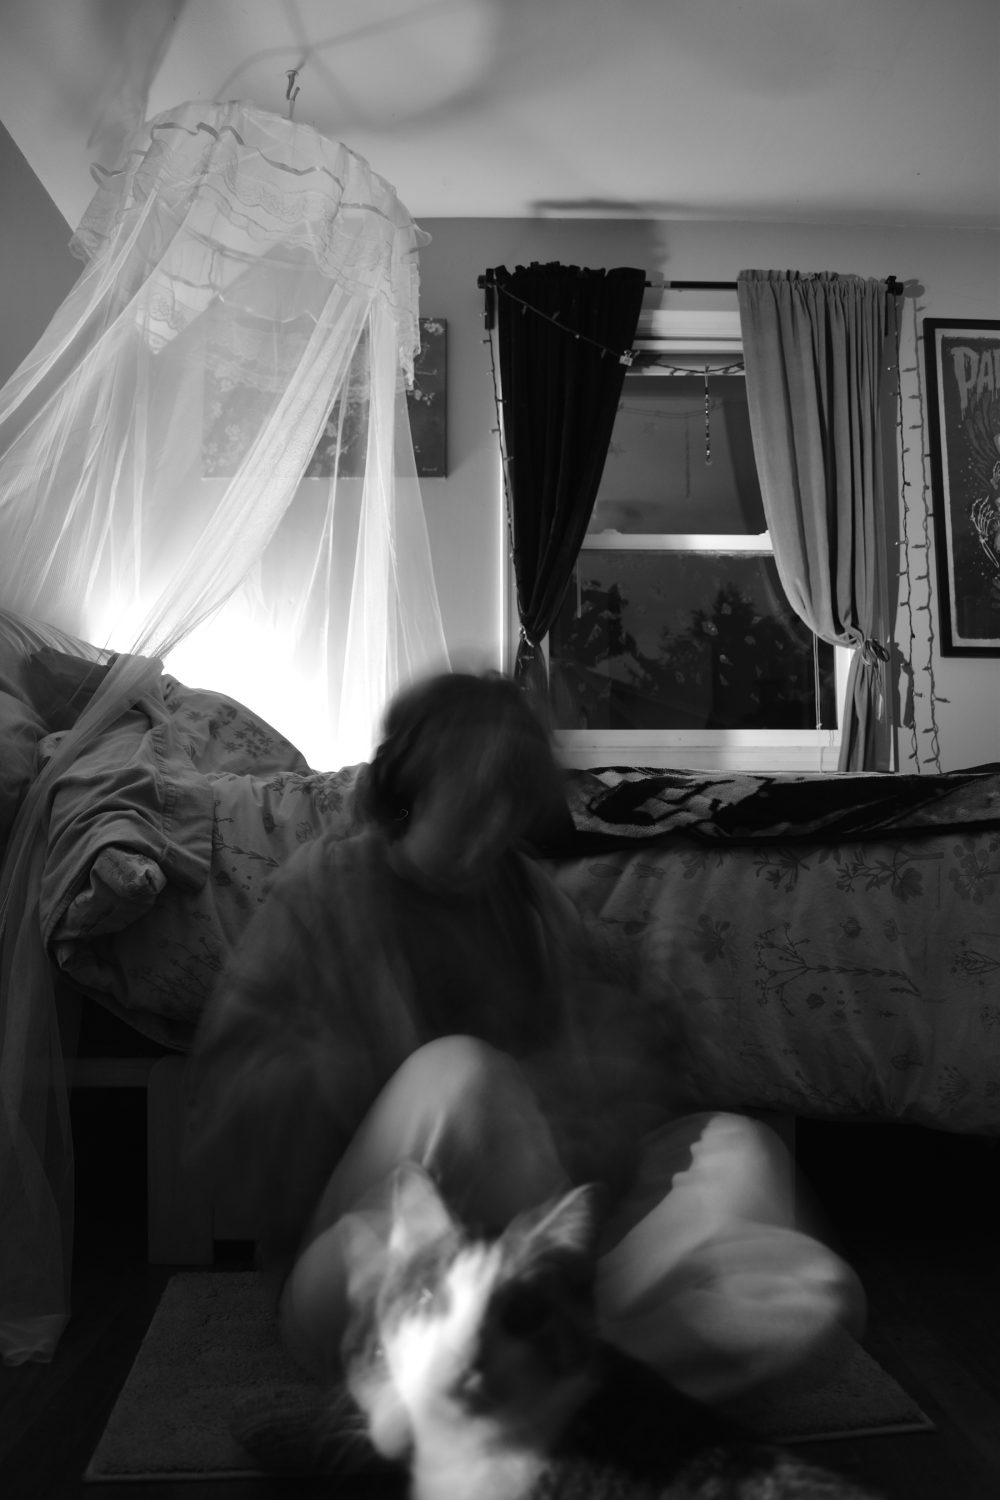 A black and white image of a moving figure sitting in front of a messy bed. A blurry cat is walking in front of the figure.